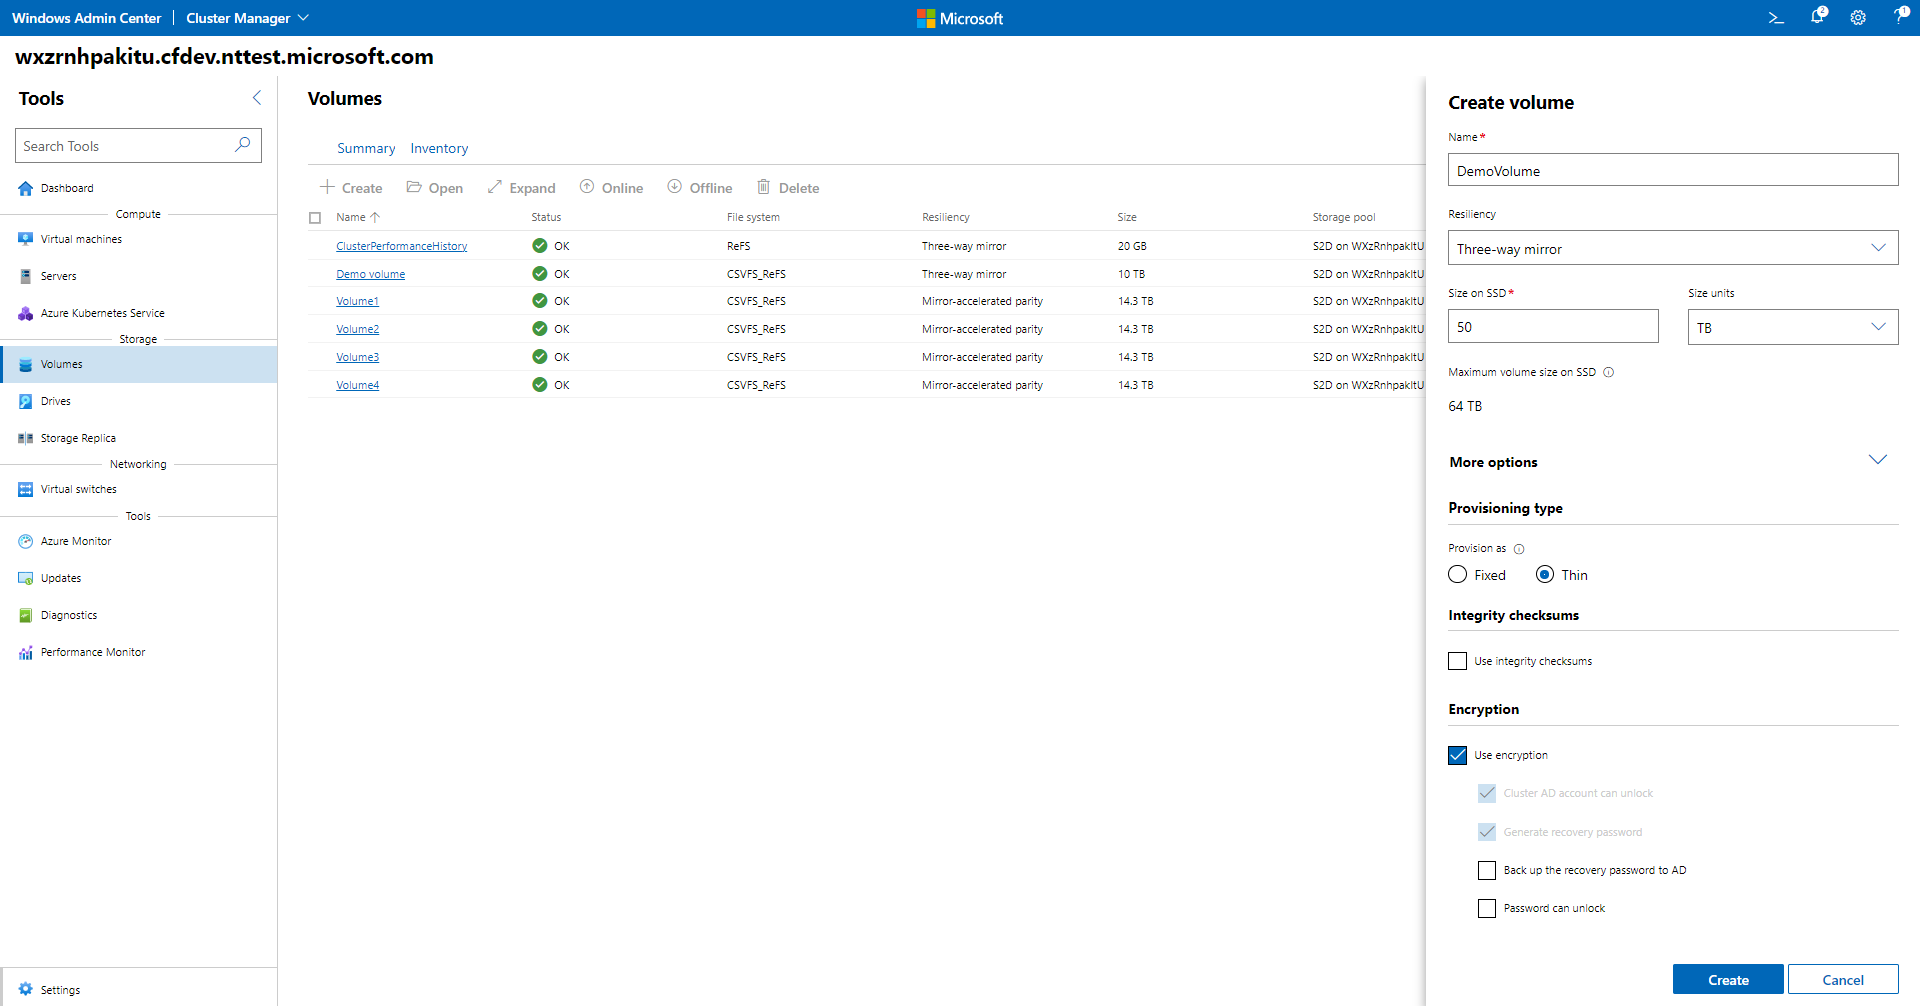 You can create a thinly provisioned volume in Windows Admin Center.